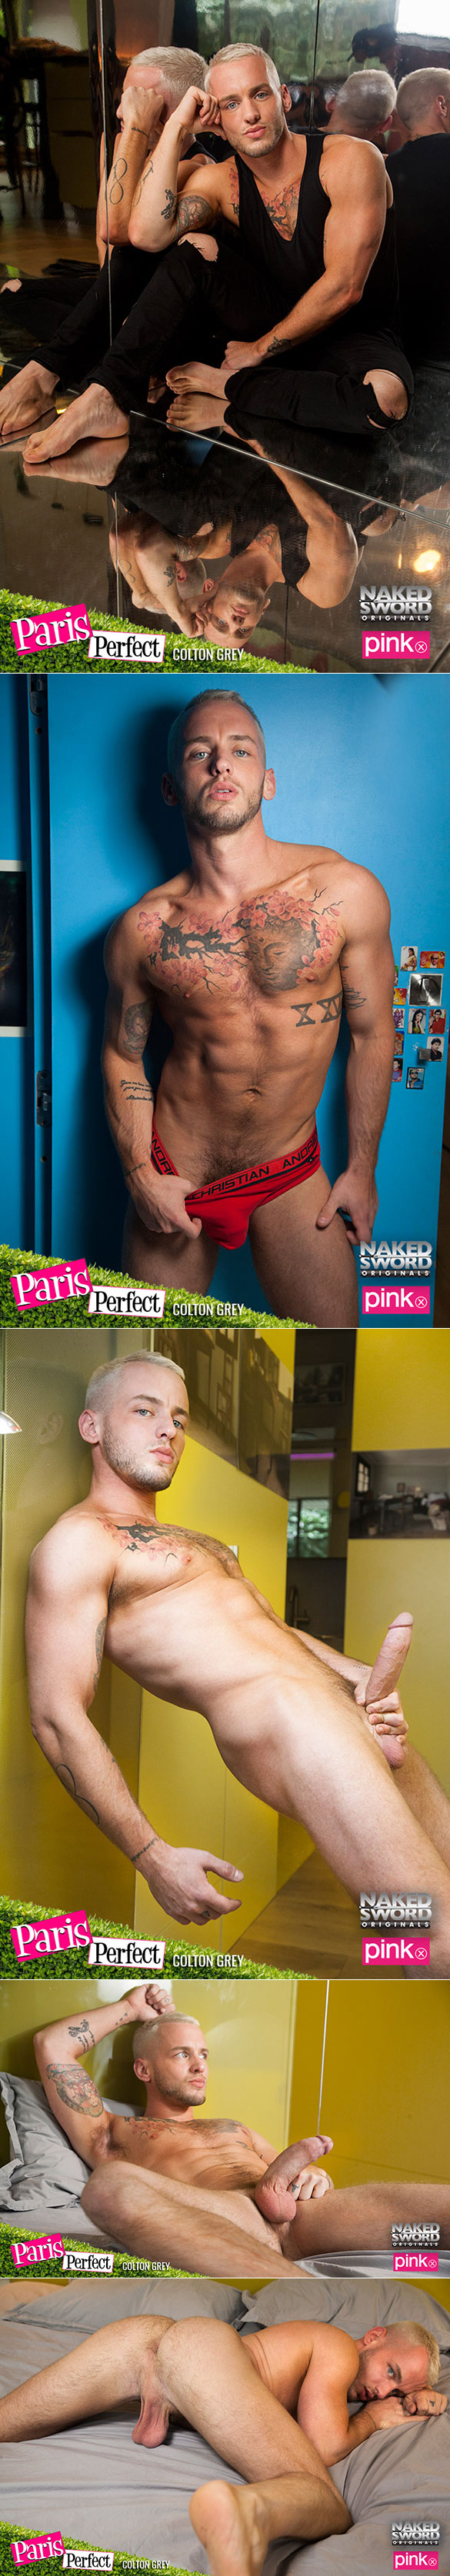 NakedSword Originals: Colton Grey and Gabriel Cross bang each other in "Paris Perfect – Episode 4: Grudge Fuck"